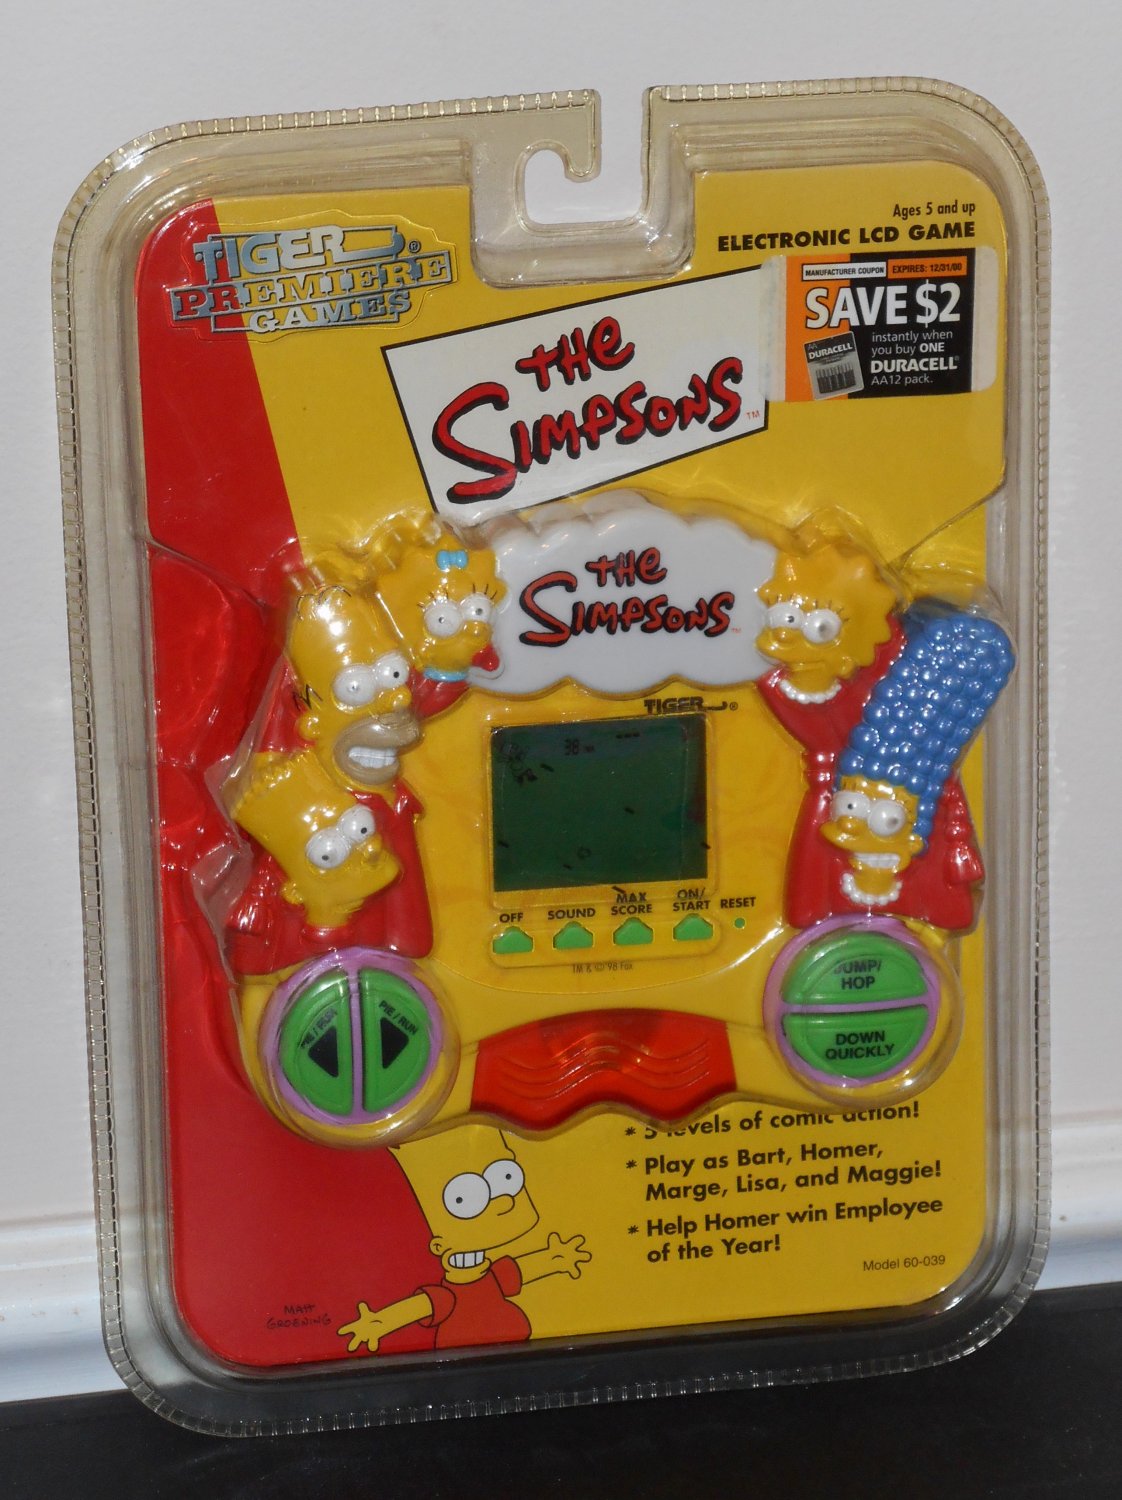 The Simpsons Electronic LCD Handheld Game 60-039 Tiger Premiere Games 1999 New NIP